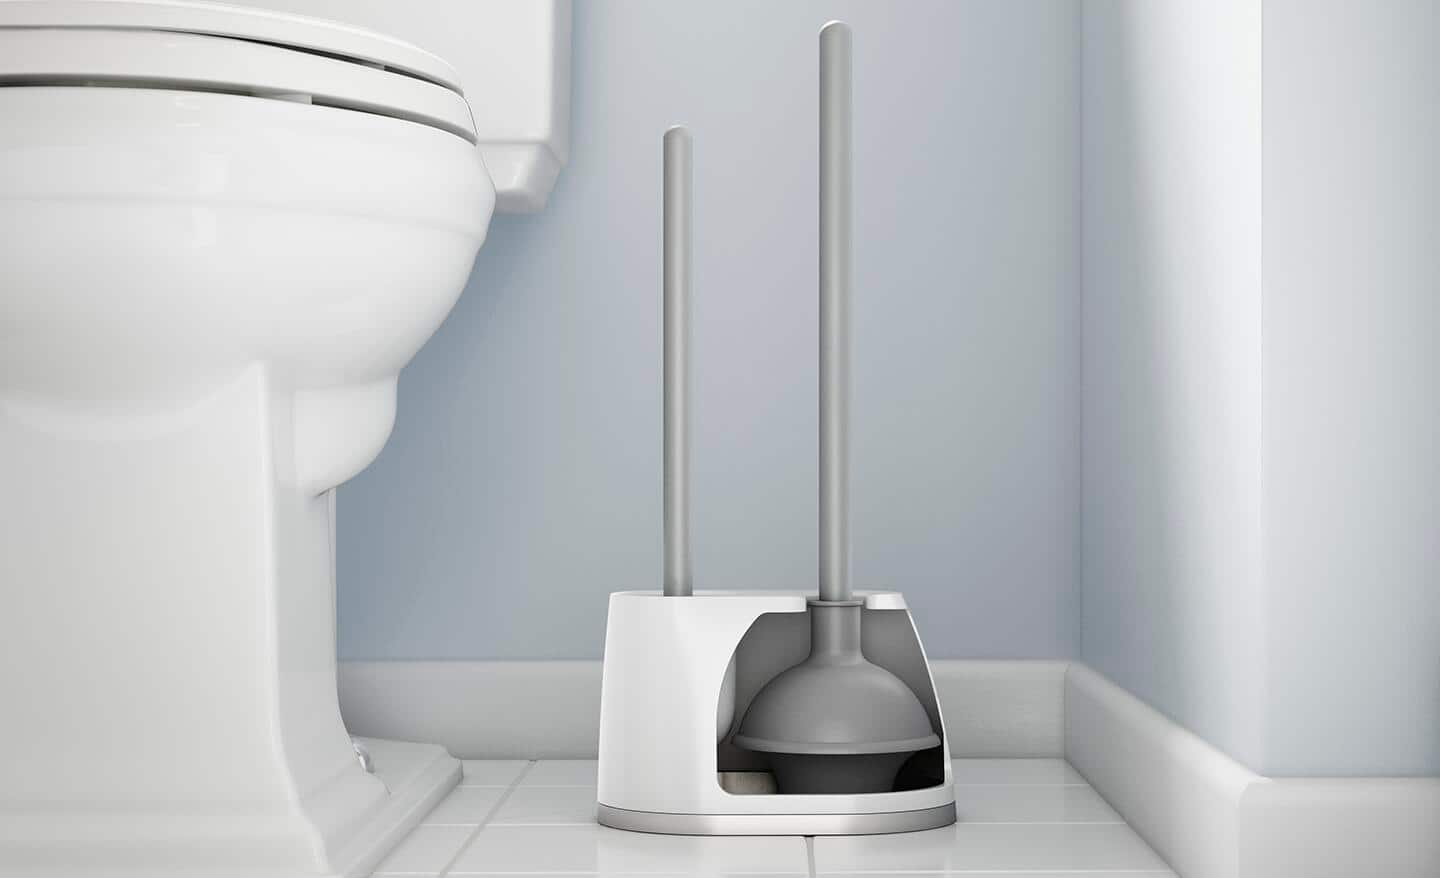 A plunger sits next to a toilet in a bathroom.